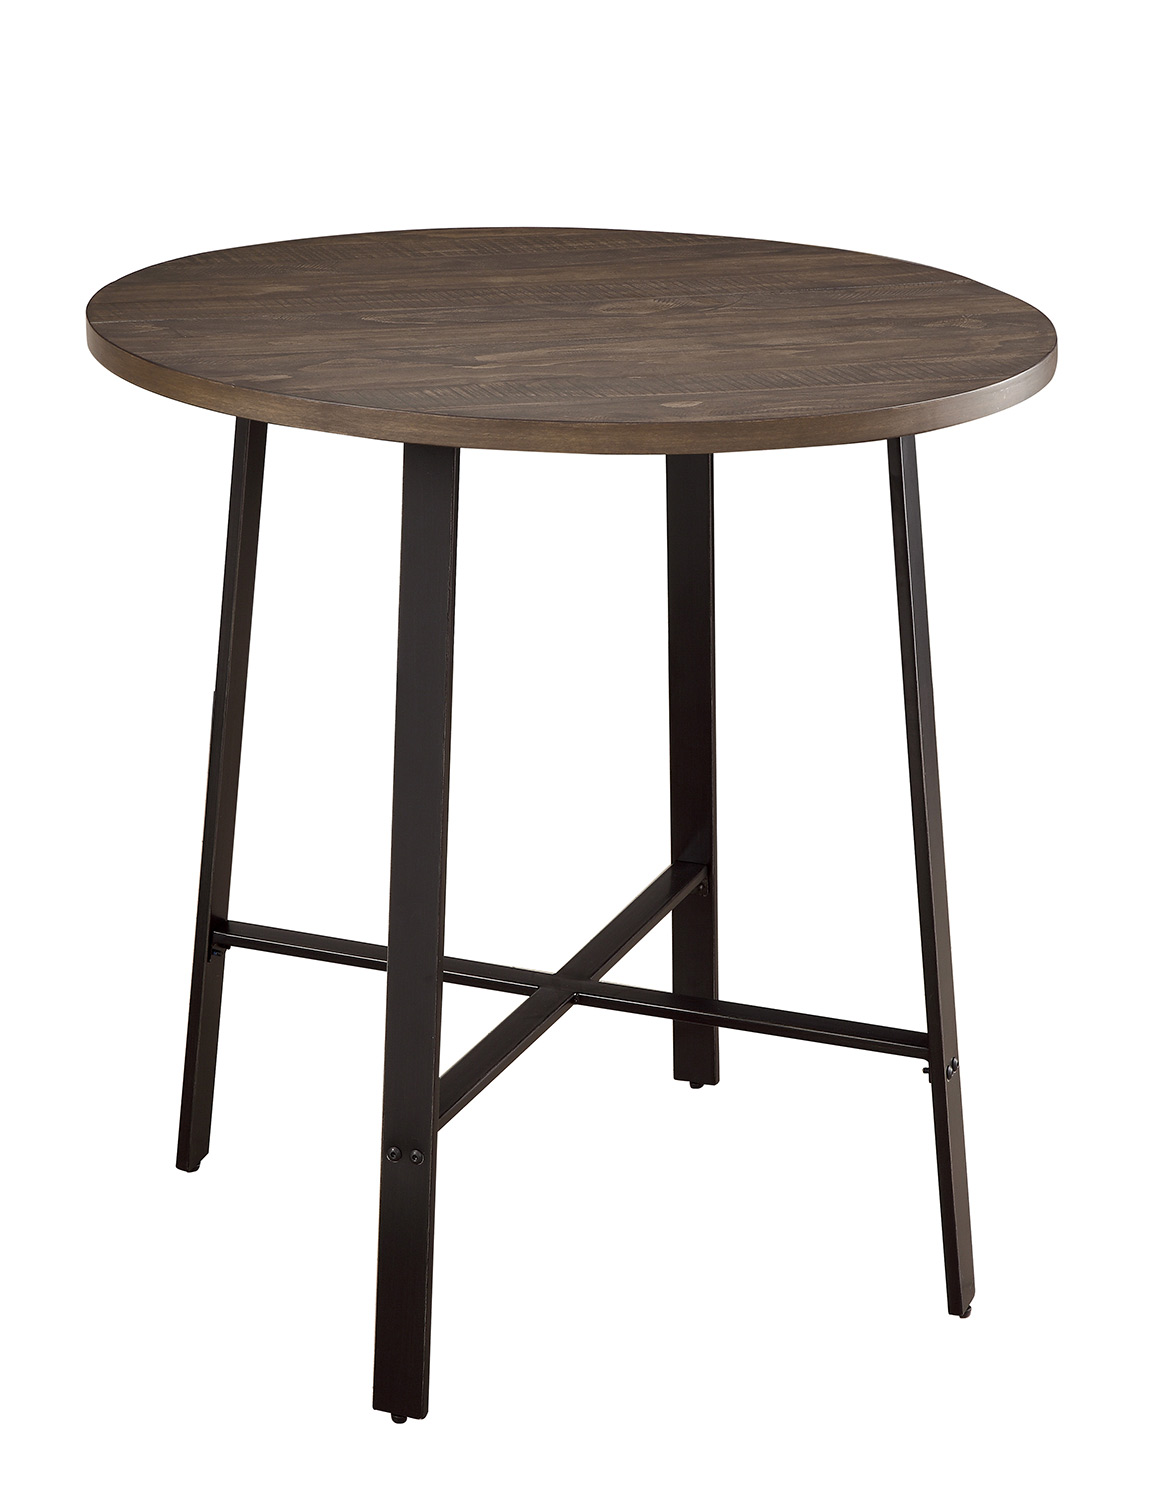 Homelegance Chevre Round Counter Height Table - Rustic - Gray Metal